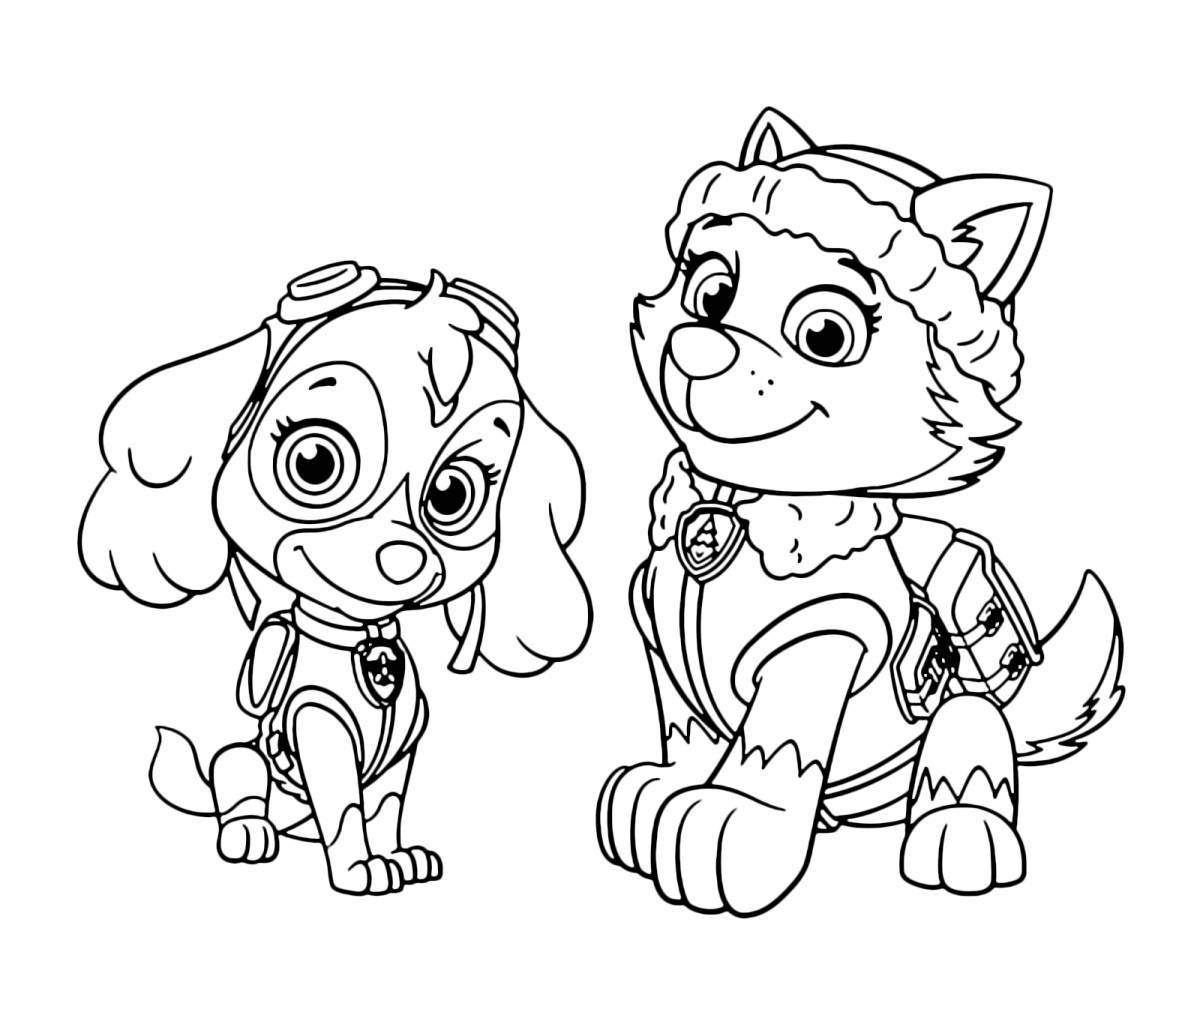 Colorful Paw Patrol Coloring Page for 6-7 year olds